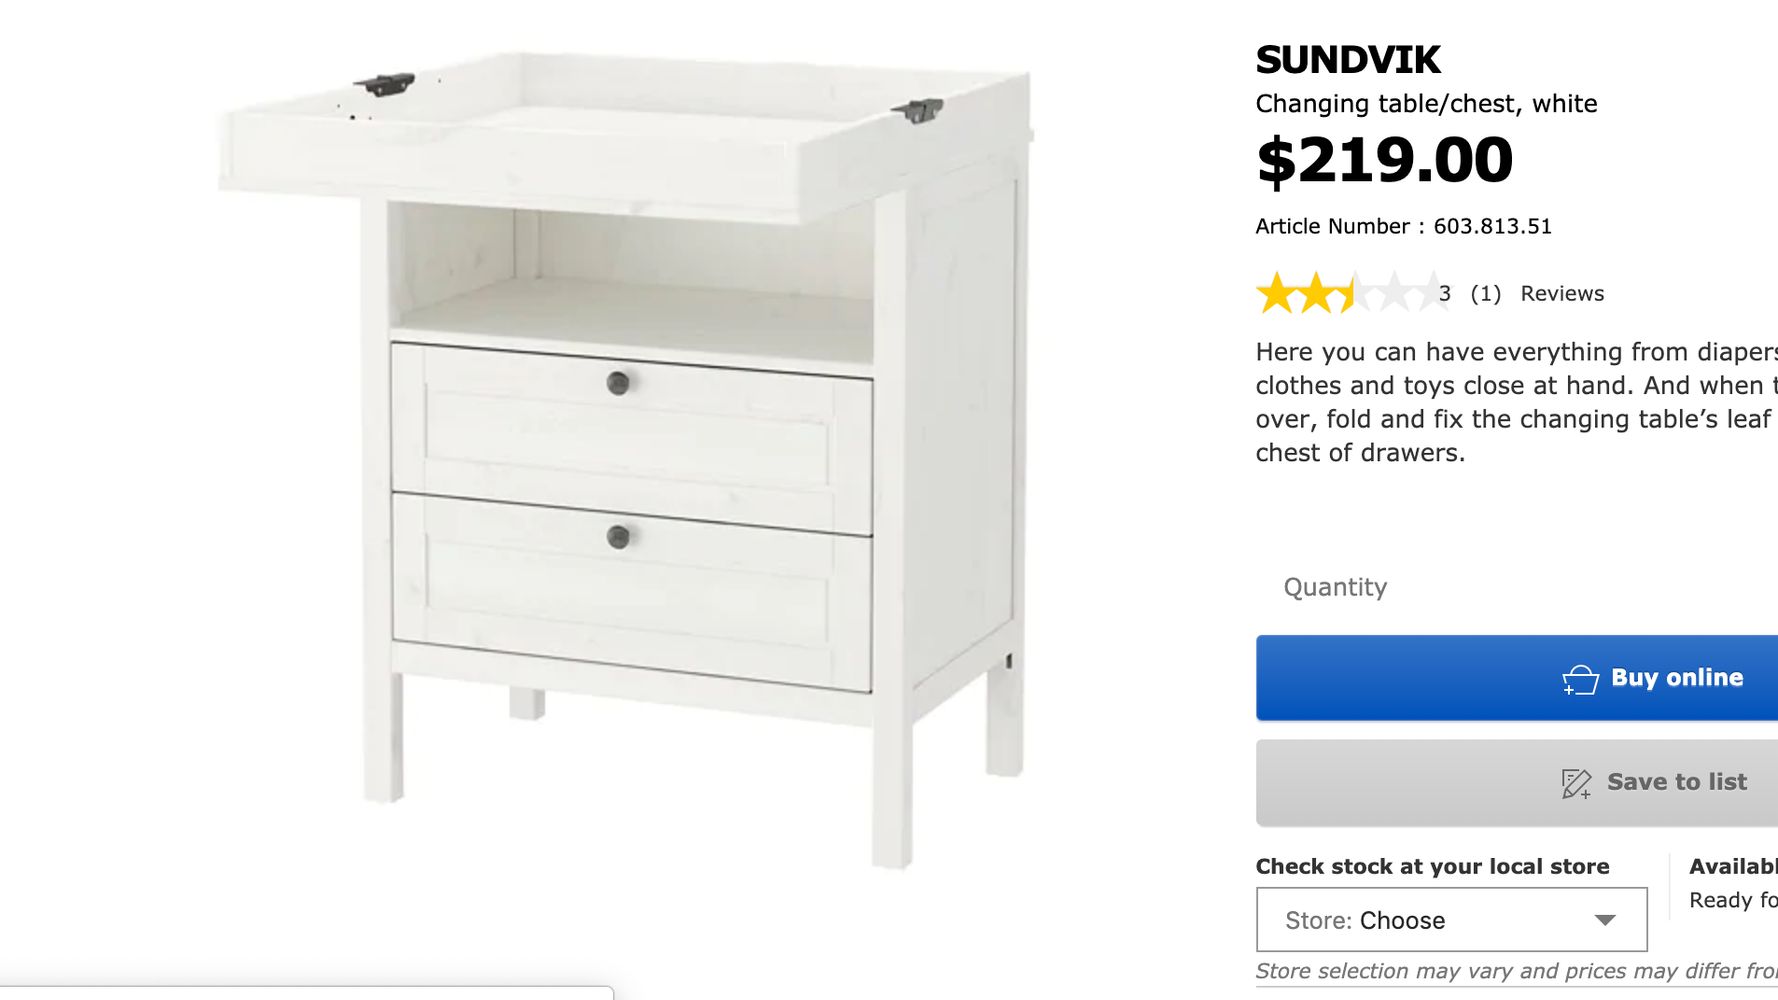 Ikea Issues Warning About Sundvik Change Tables After Reports Of